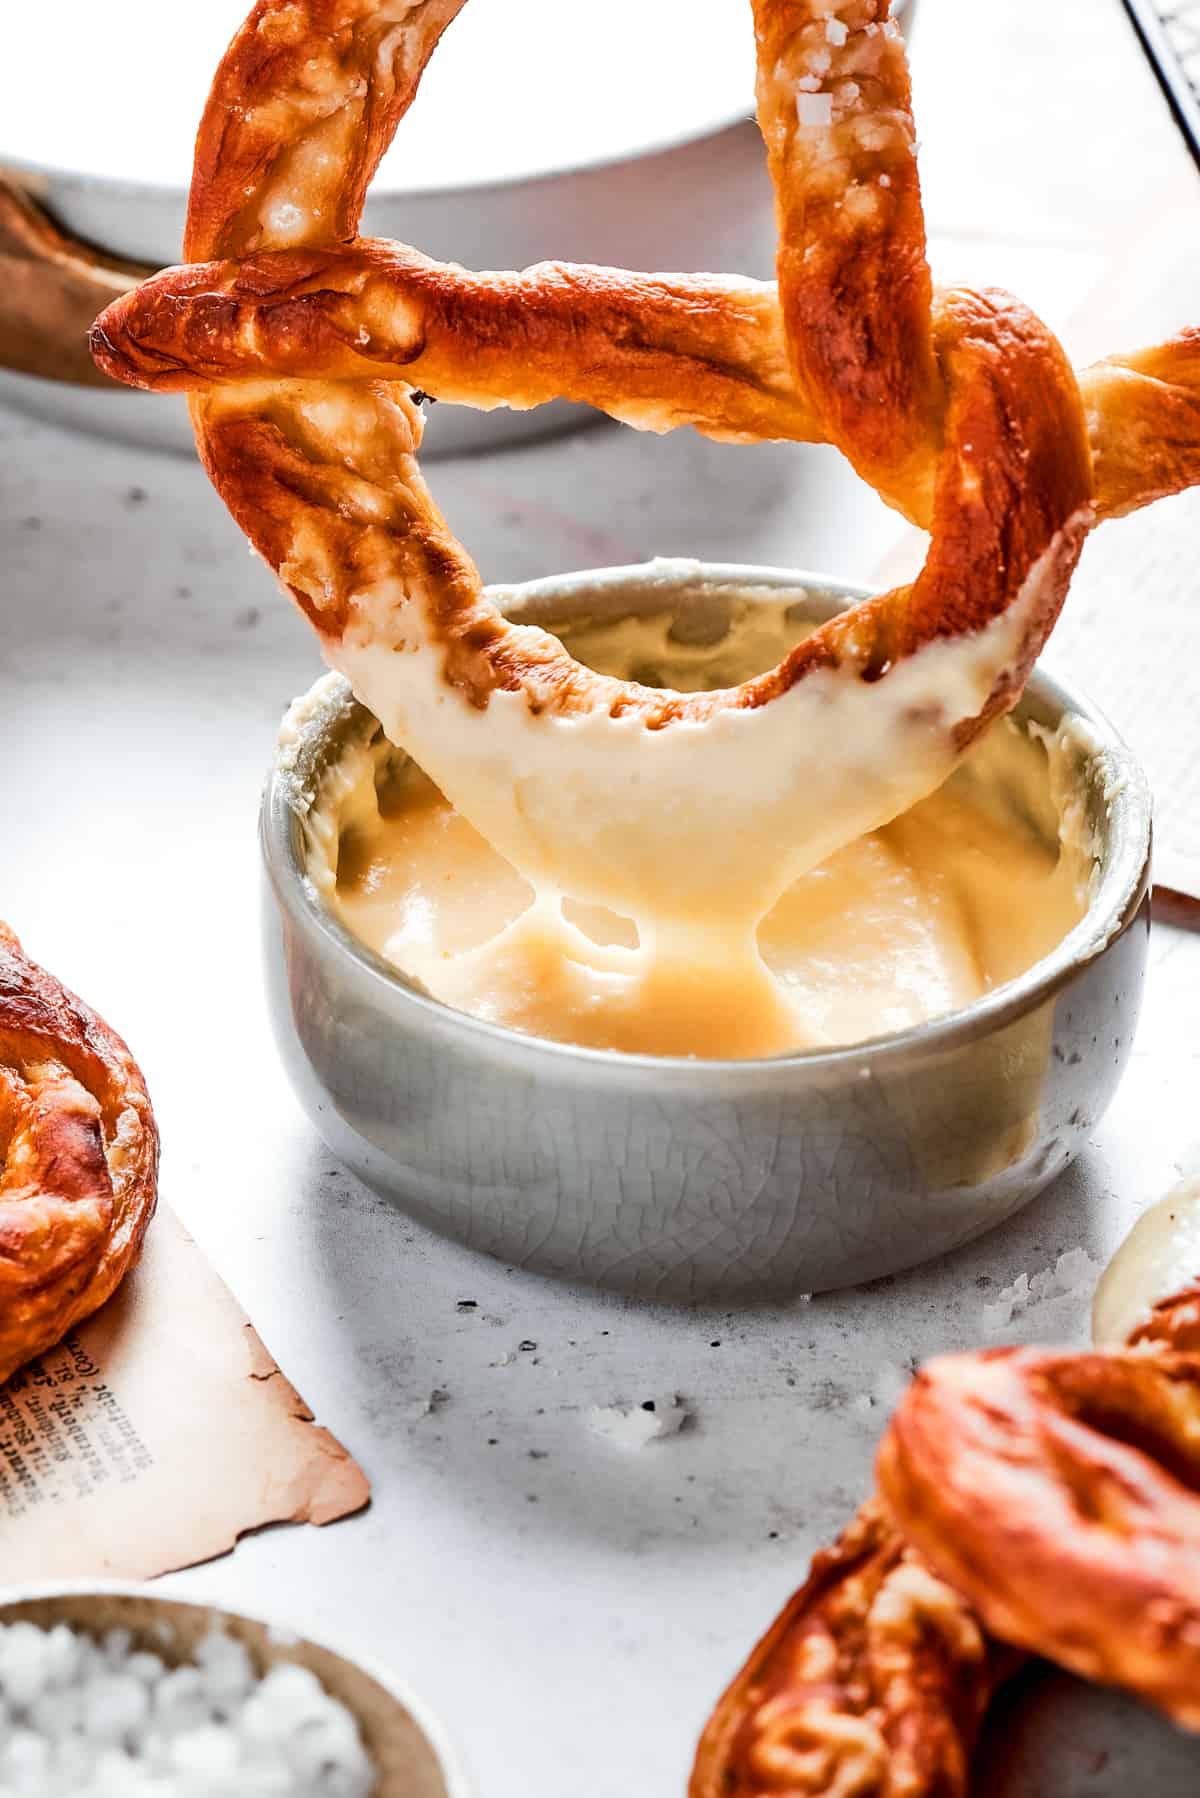 A soft pretzel is dipped in cheese sauce.